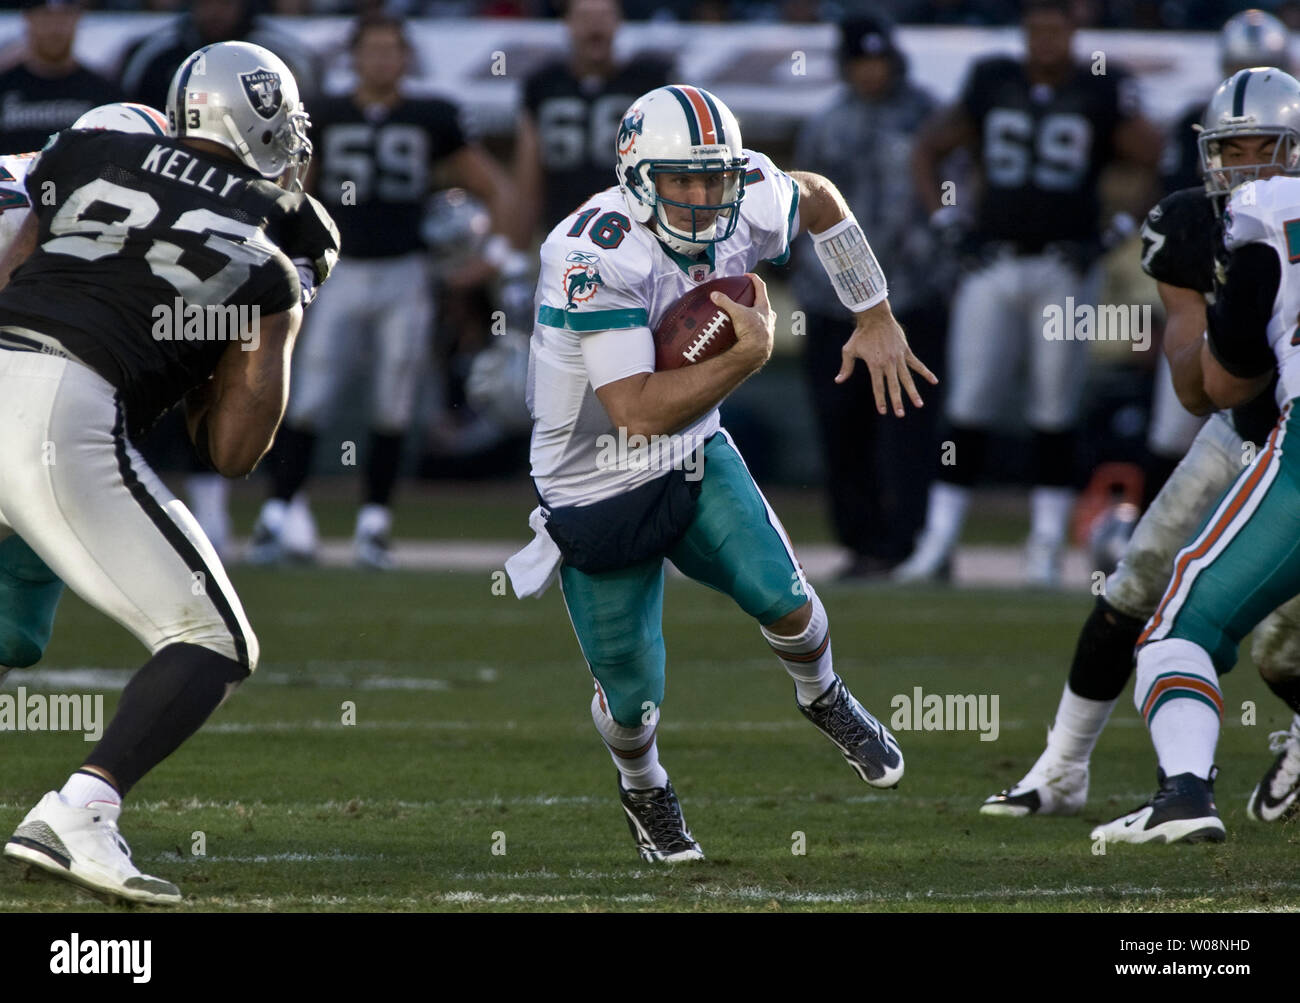 Miami Dolphins QB Tyler Thigpen (16) runs for yardage in the third quarter against the Oakland Raiders at the Oakland Coliseum in Oakland, California on November 28, 2010.  The Dolphins defeated the Raiders  33-17.     UPI/Terry Schmitt Stock Photo